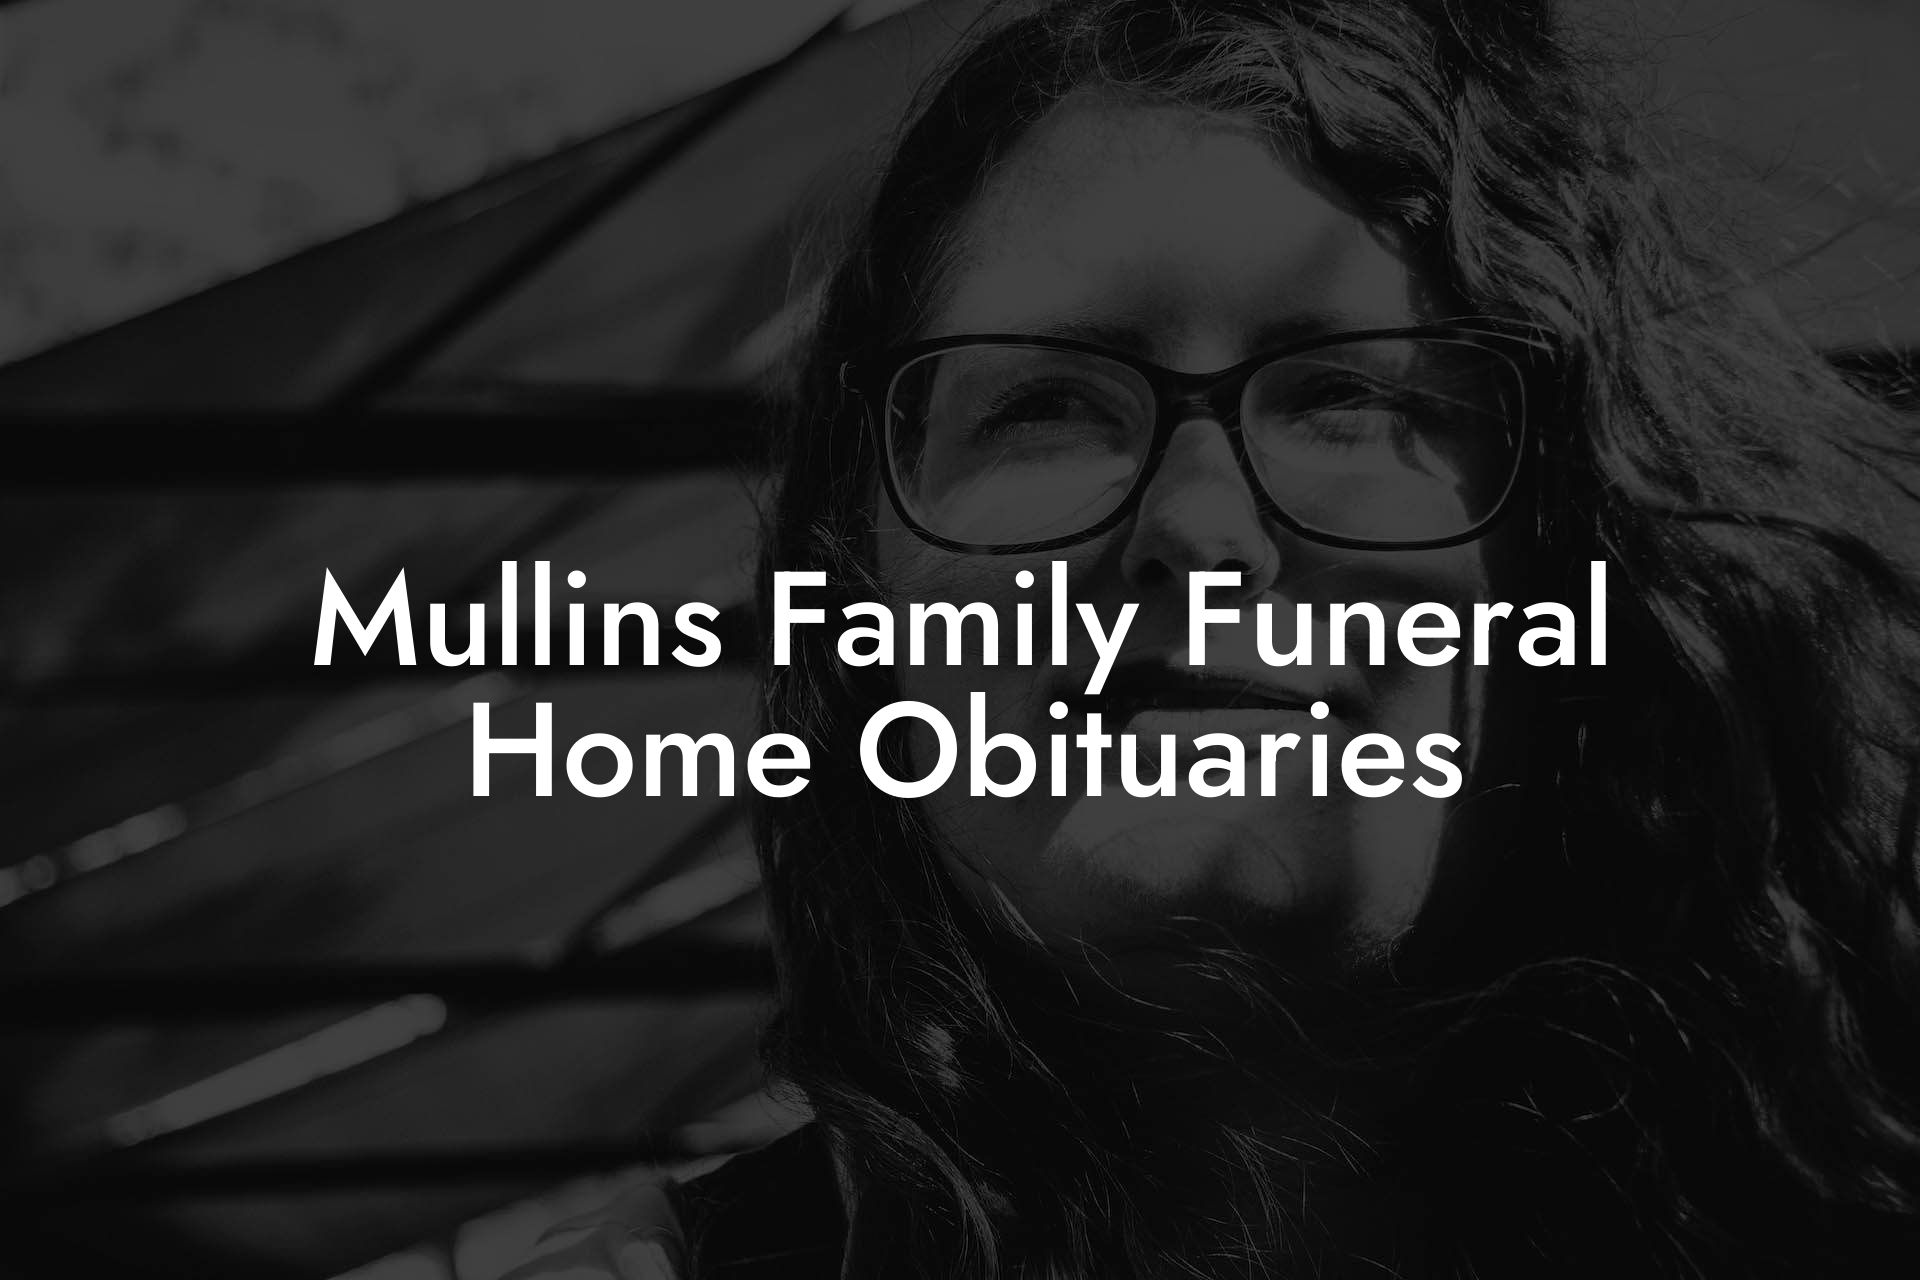 Mullins Family Funeral Home Obituaries